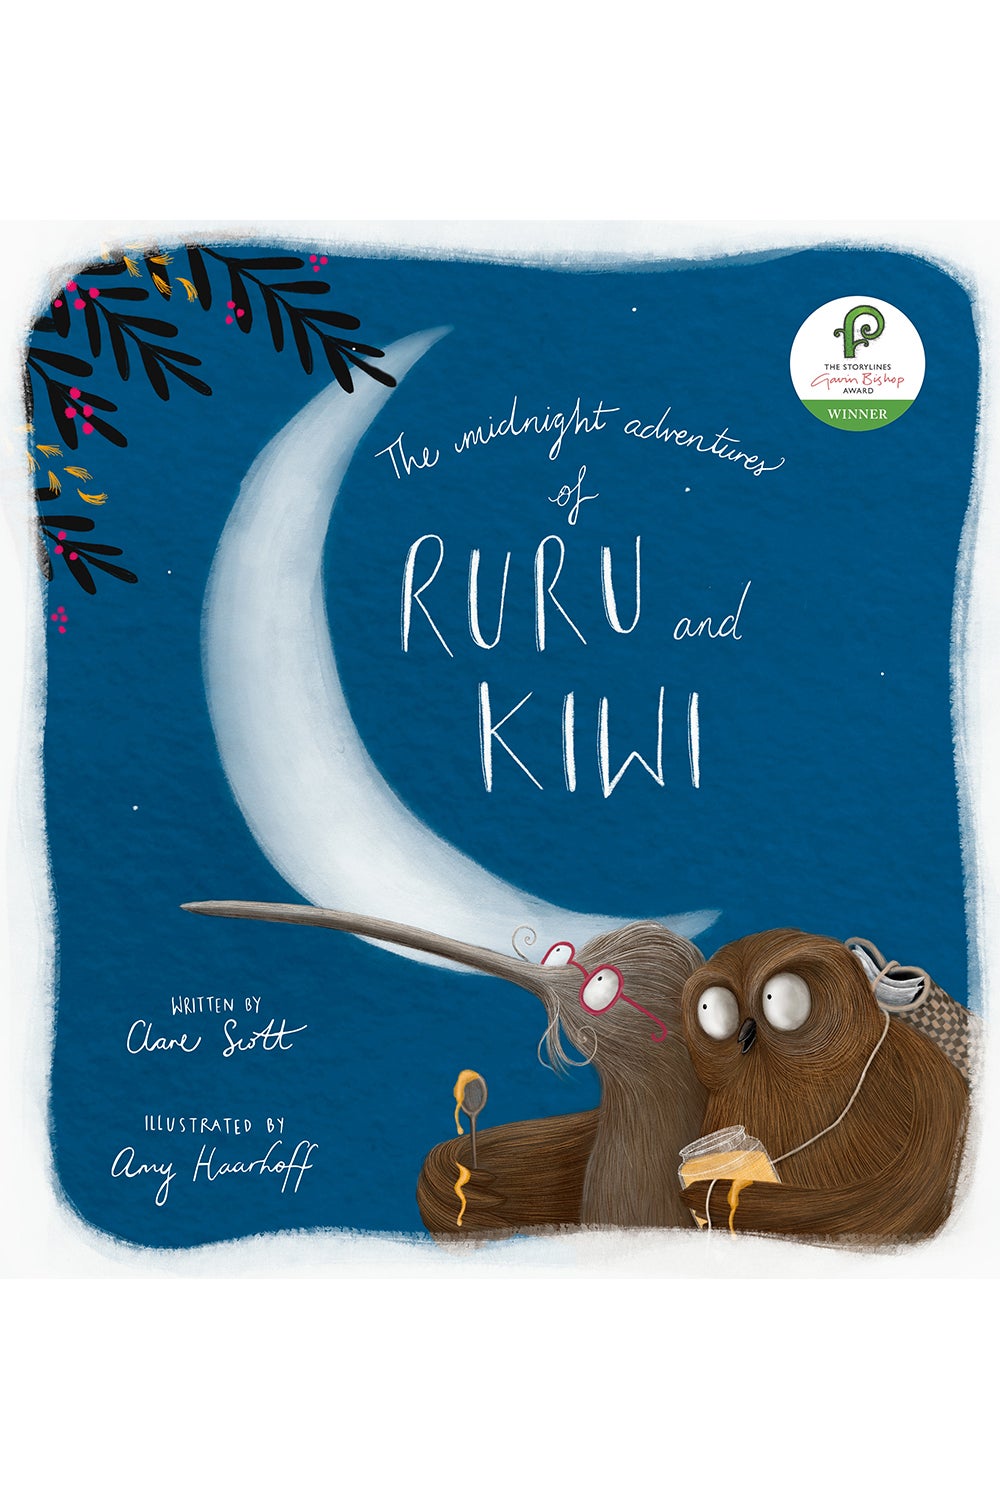 The Midnight adventures of Ruru and Kiwi by Clare Scott